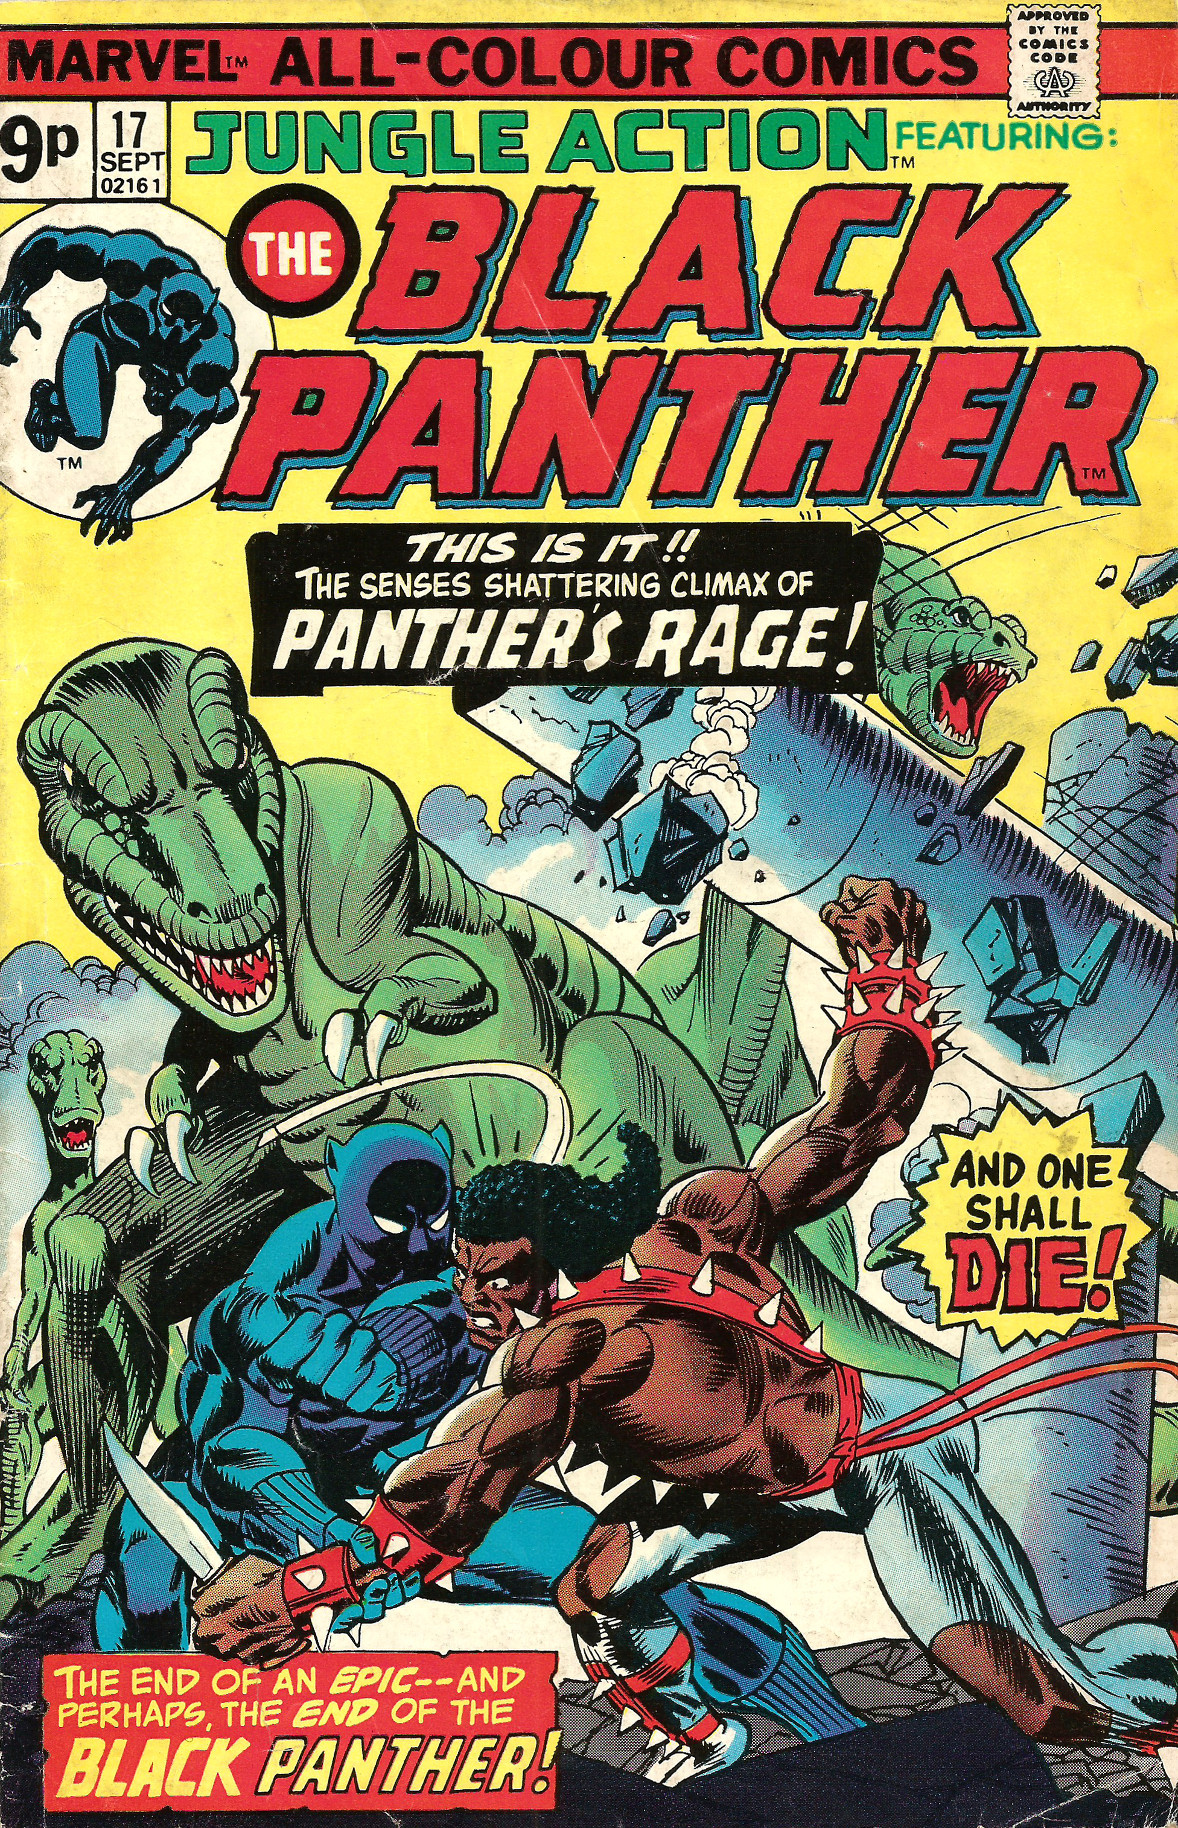 Jungle Action featuring the Black Panther Vol. 2, No. 17 (Marvel Comics, 1975). Cover